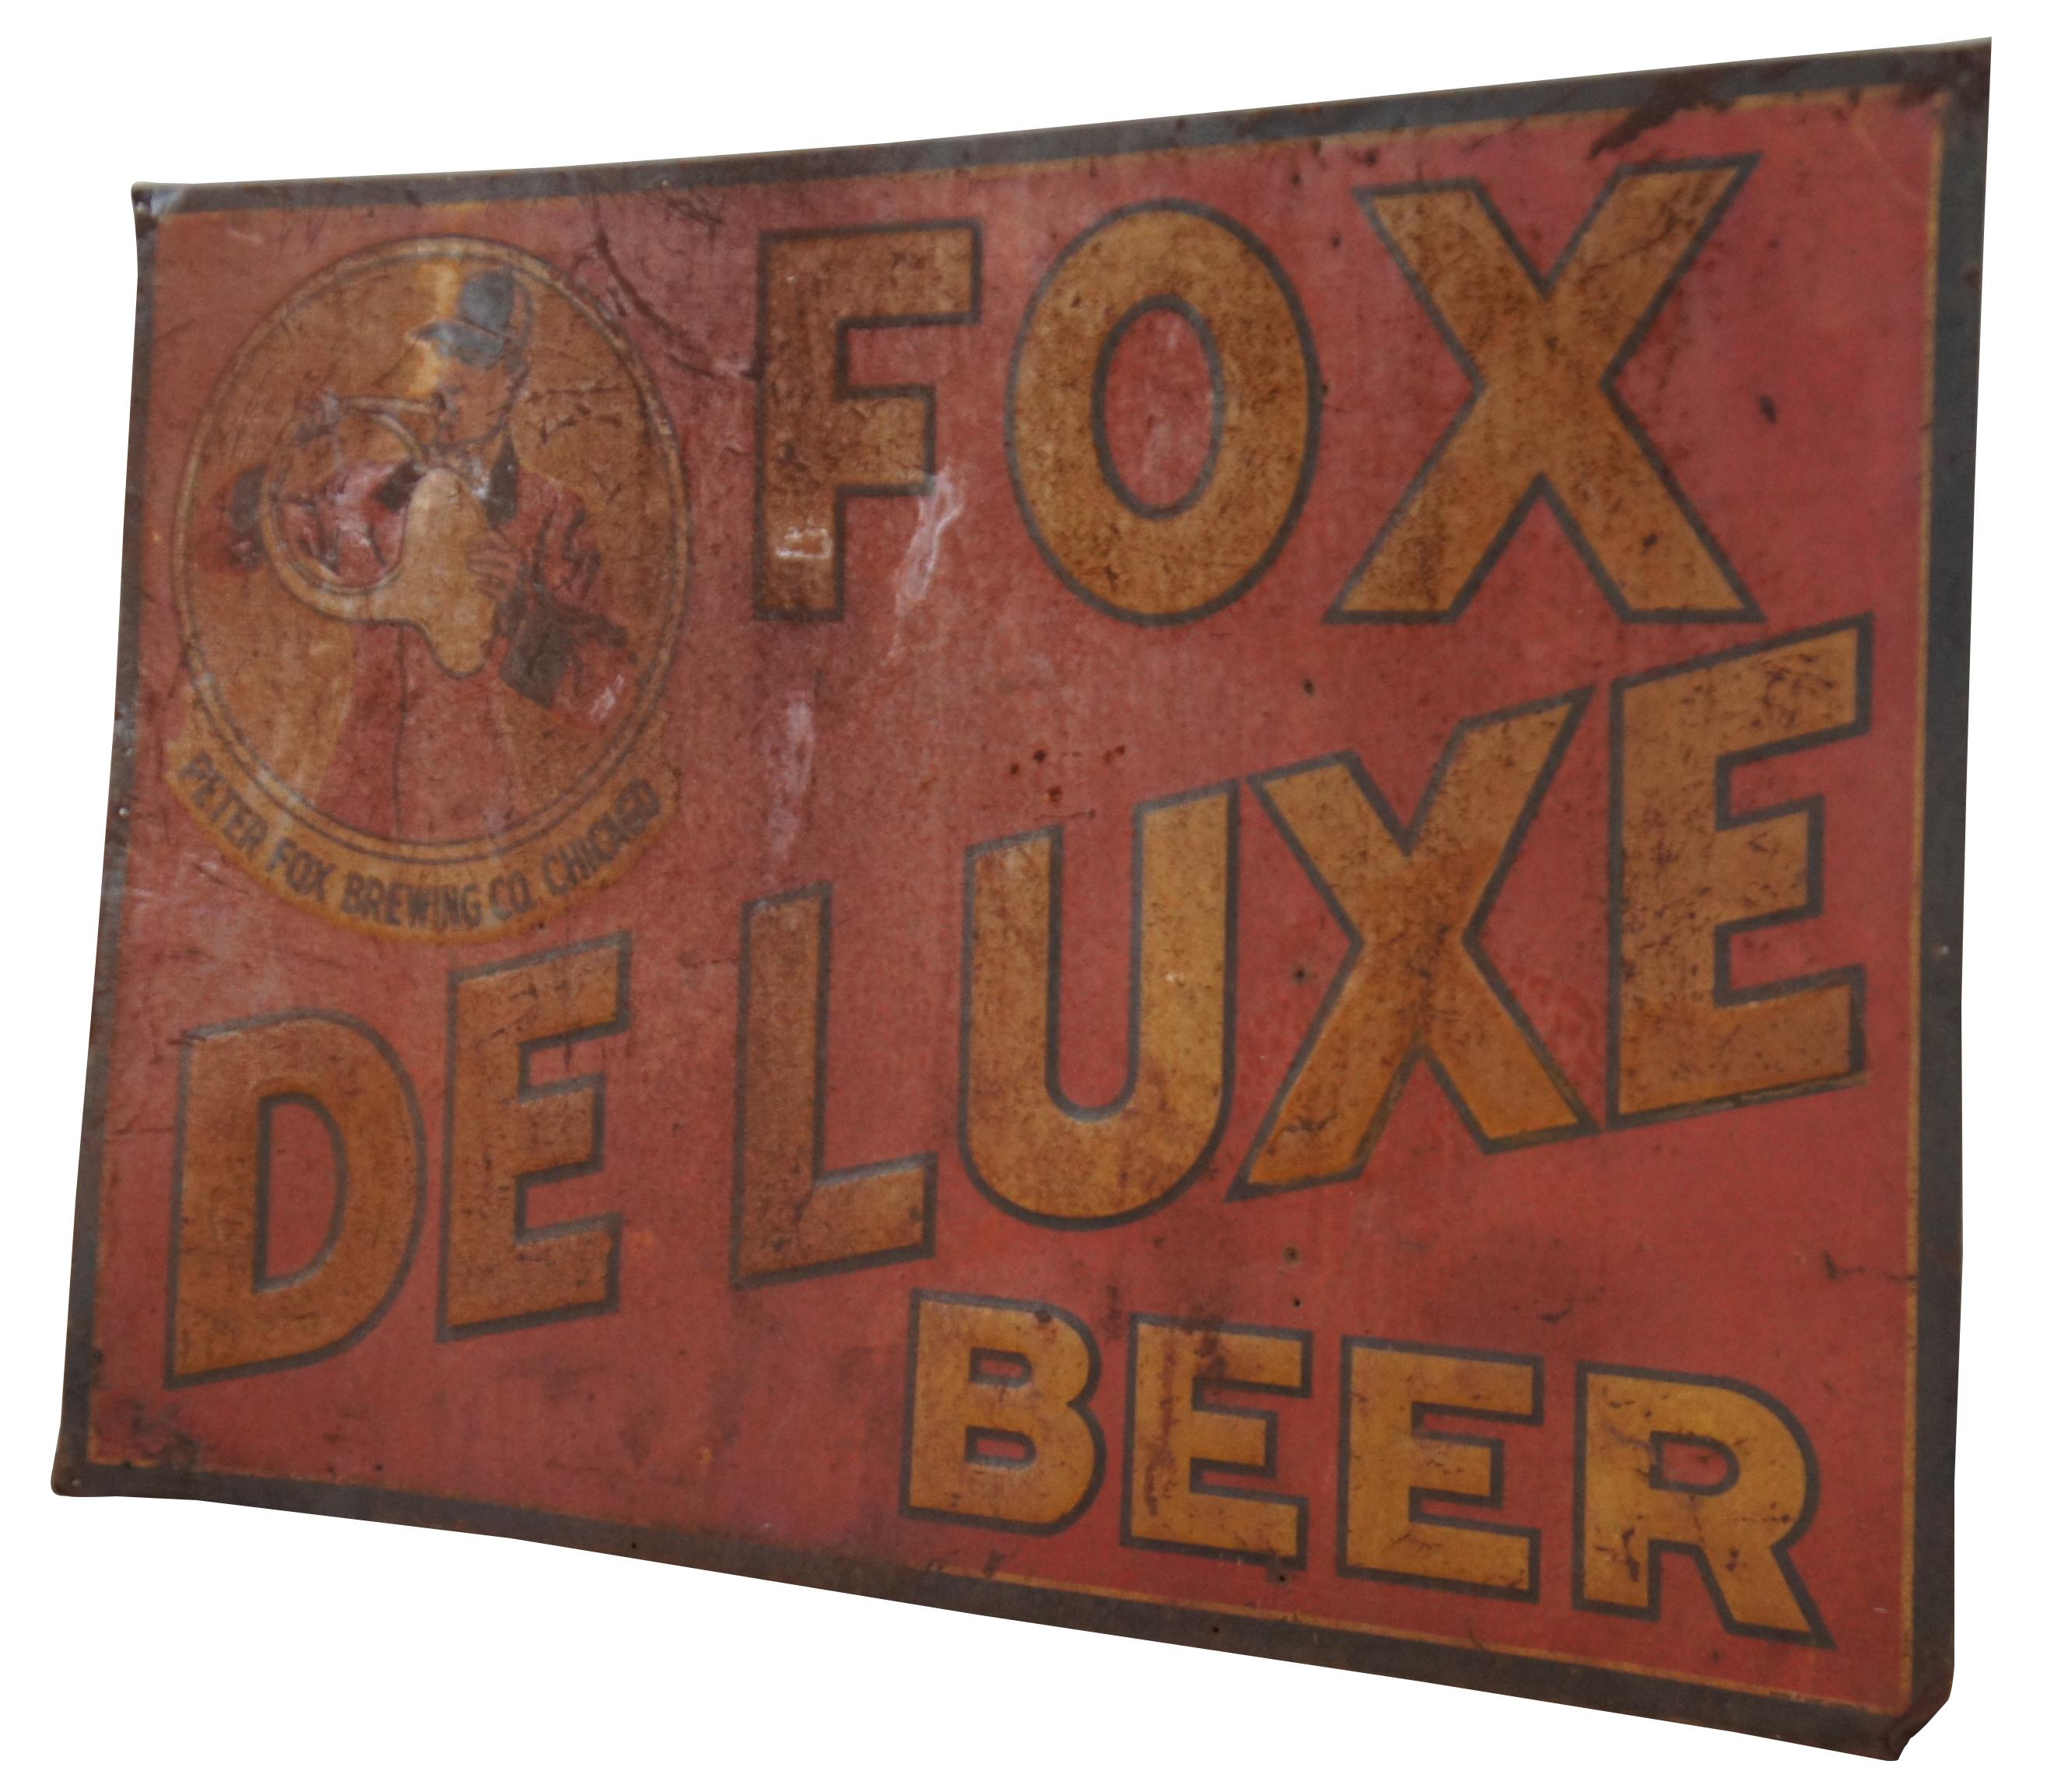 Antique yellow and red painted metal sign advertising Fox Deluxe Beer by Peter Fox Brewing Company of Chicago, Illinois. The sign features a foxhunt scene with a field guide dressed in traditional English hunt attire blowing a coiled French horn.